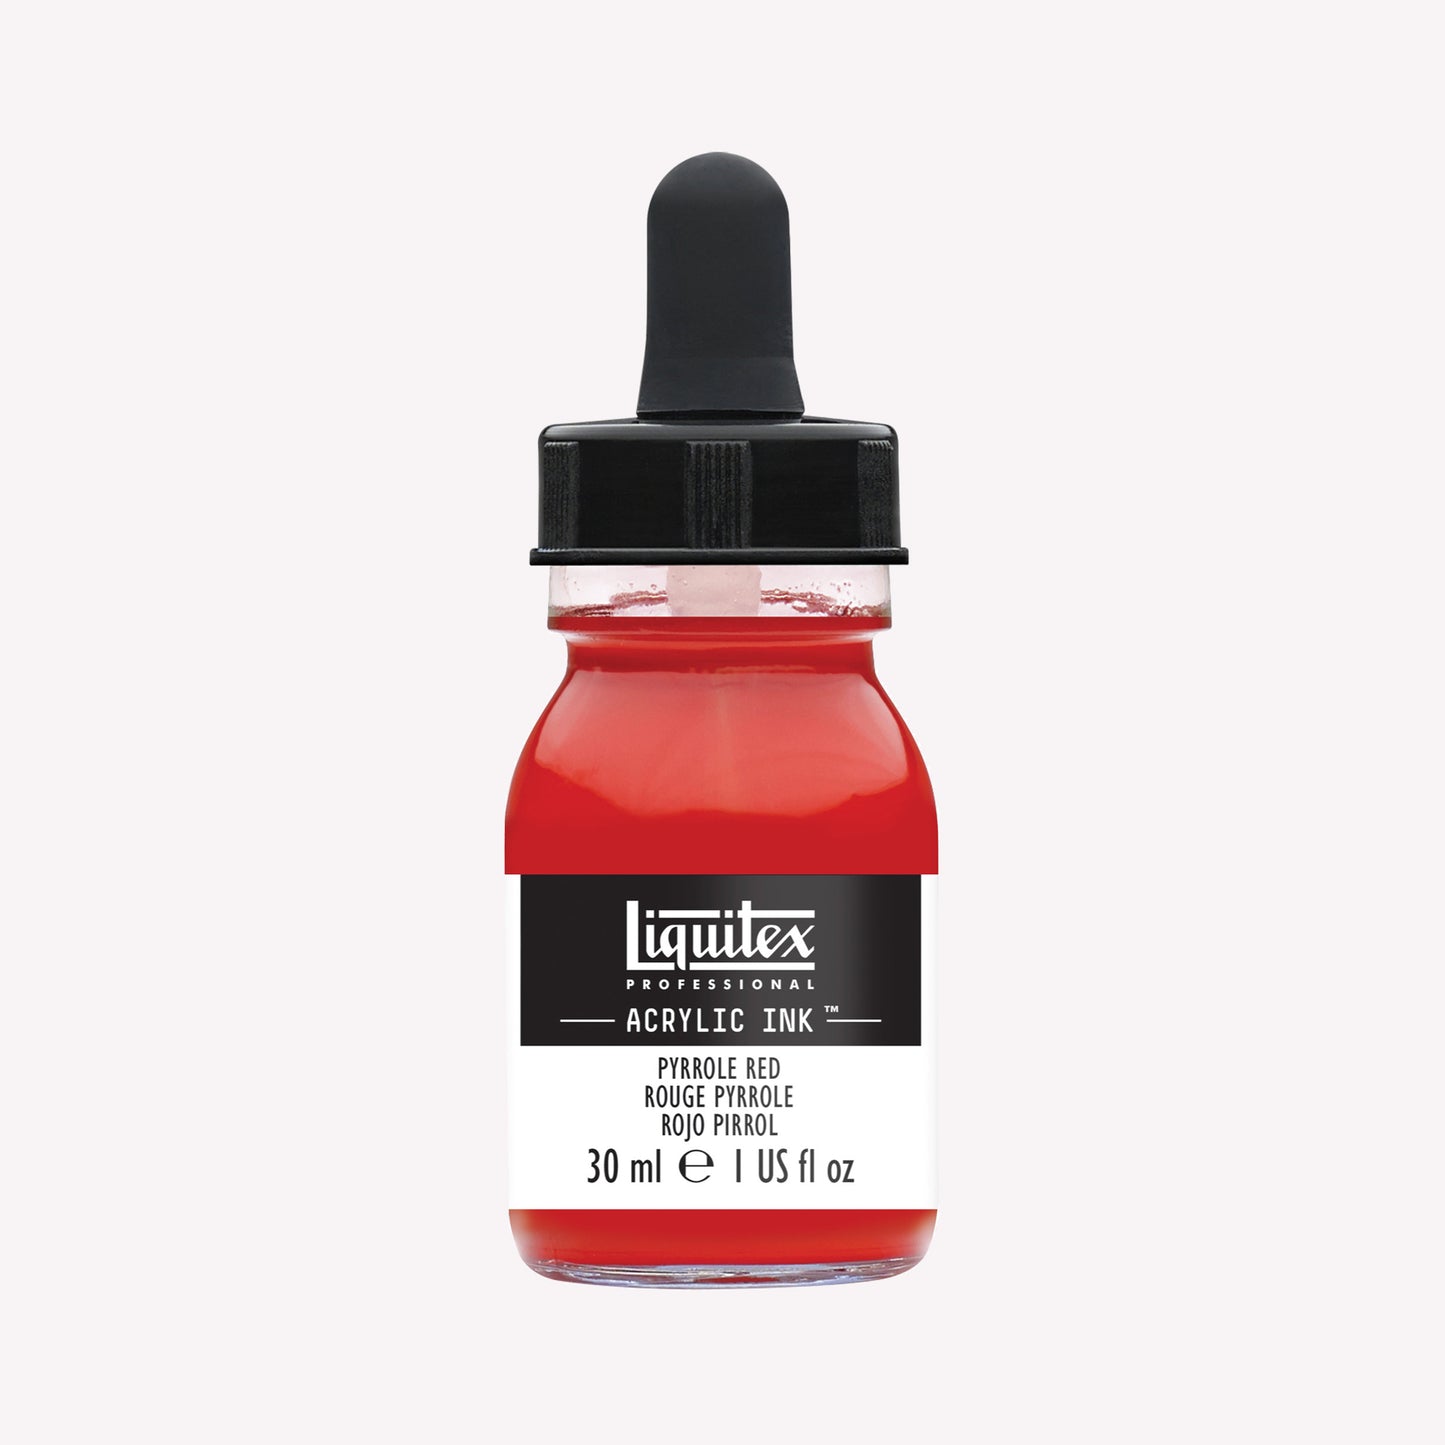 A 30ml glass jar of highly pigmented, artist-quality acrylic ink in the shade Pyrrole Red with a pipette lid. Made by Liquitex. 